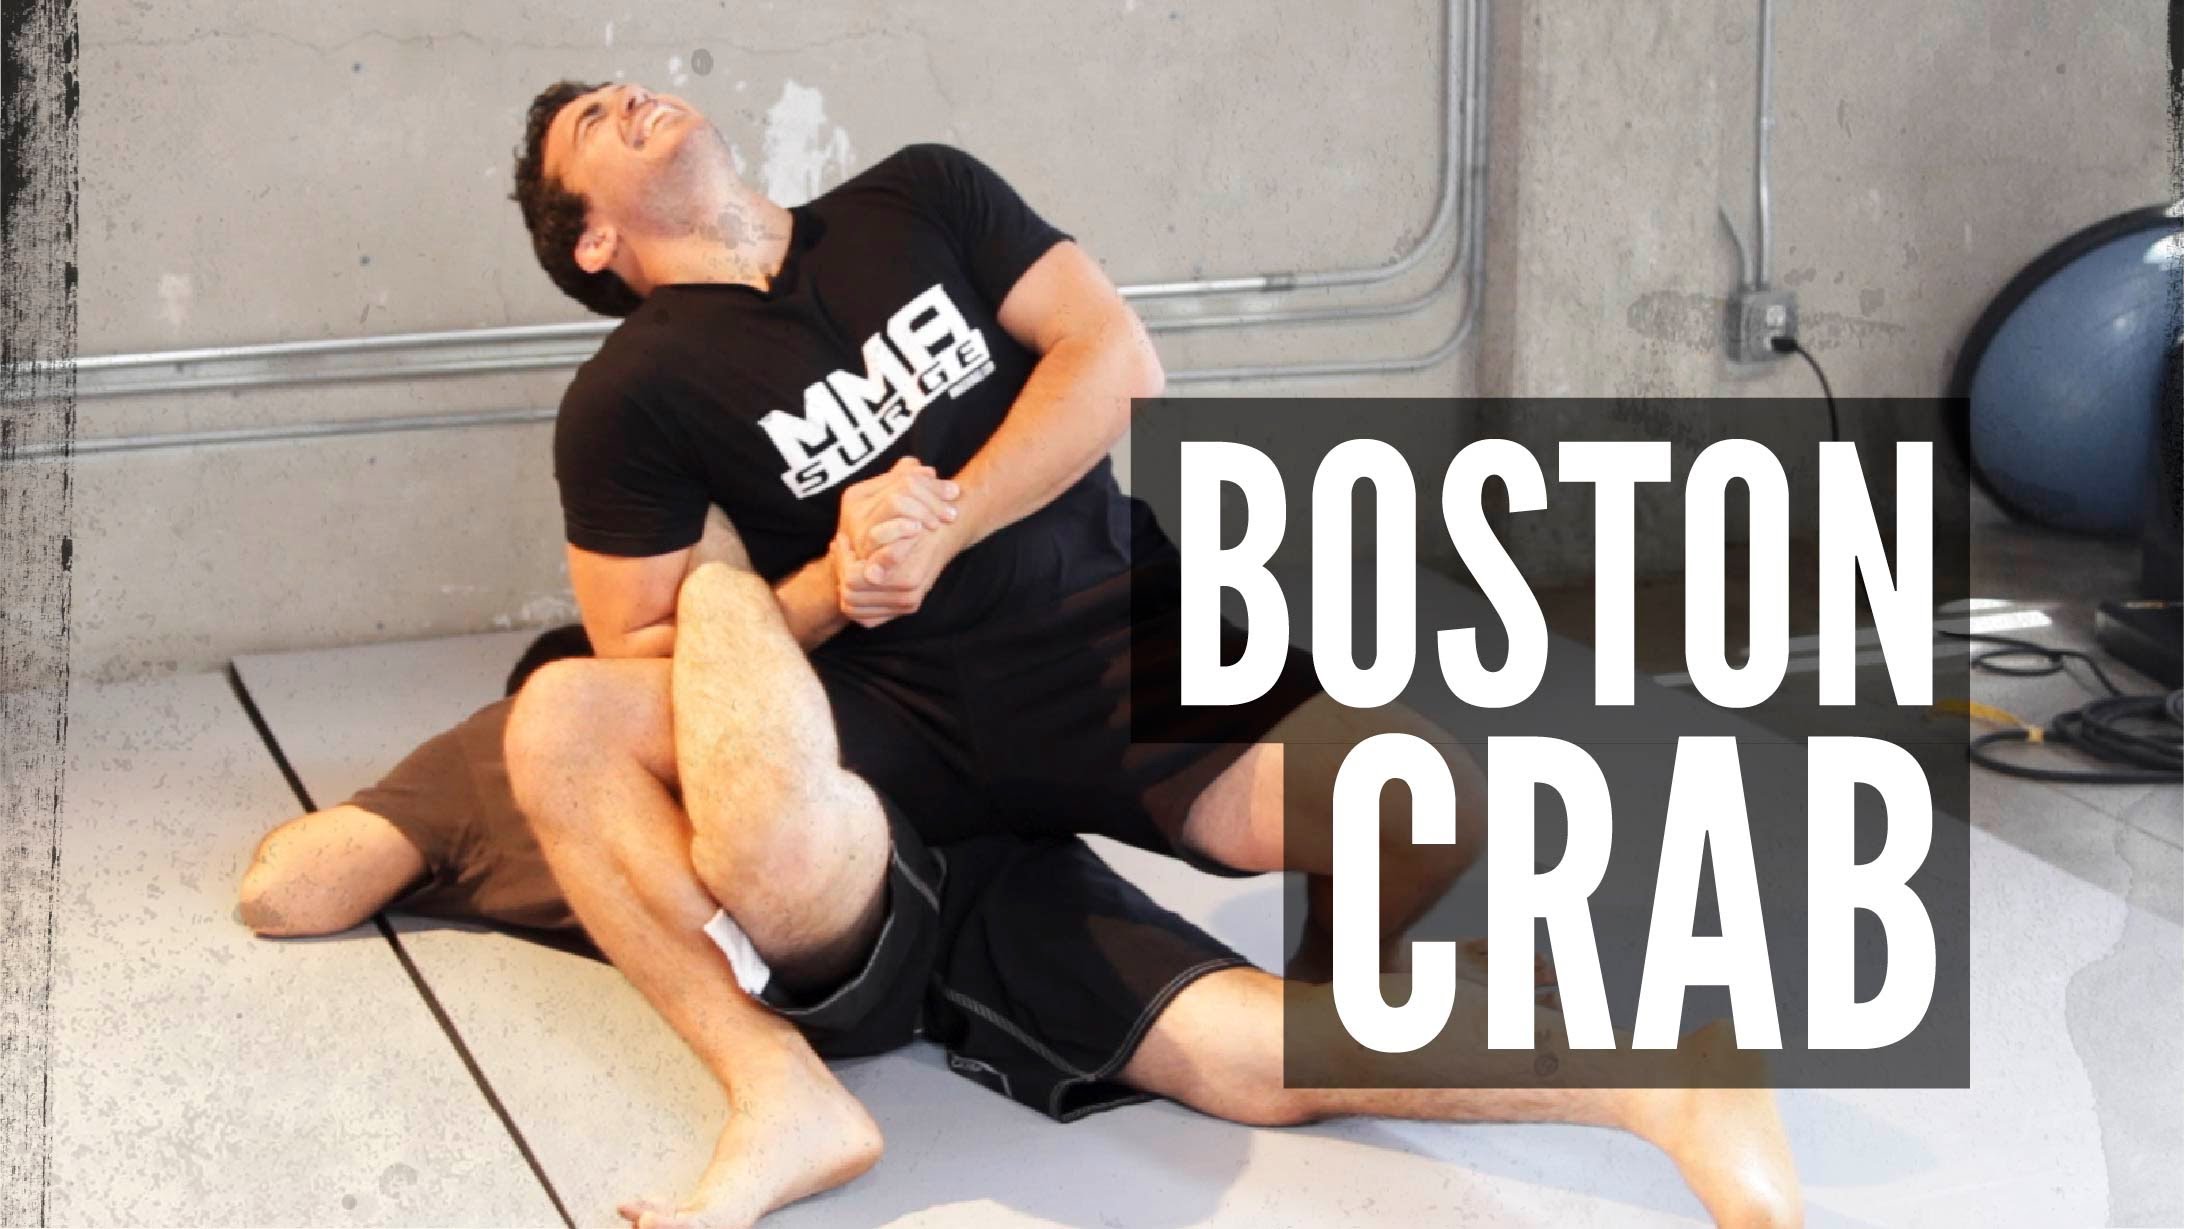 How To Set Up and Execute the Boston Crab Submission